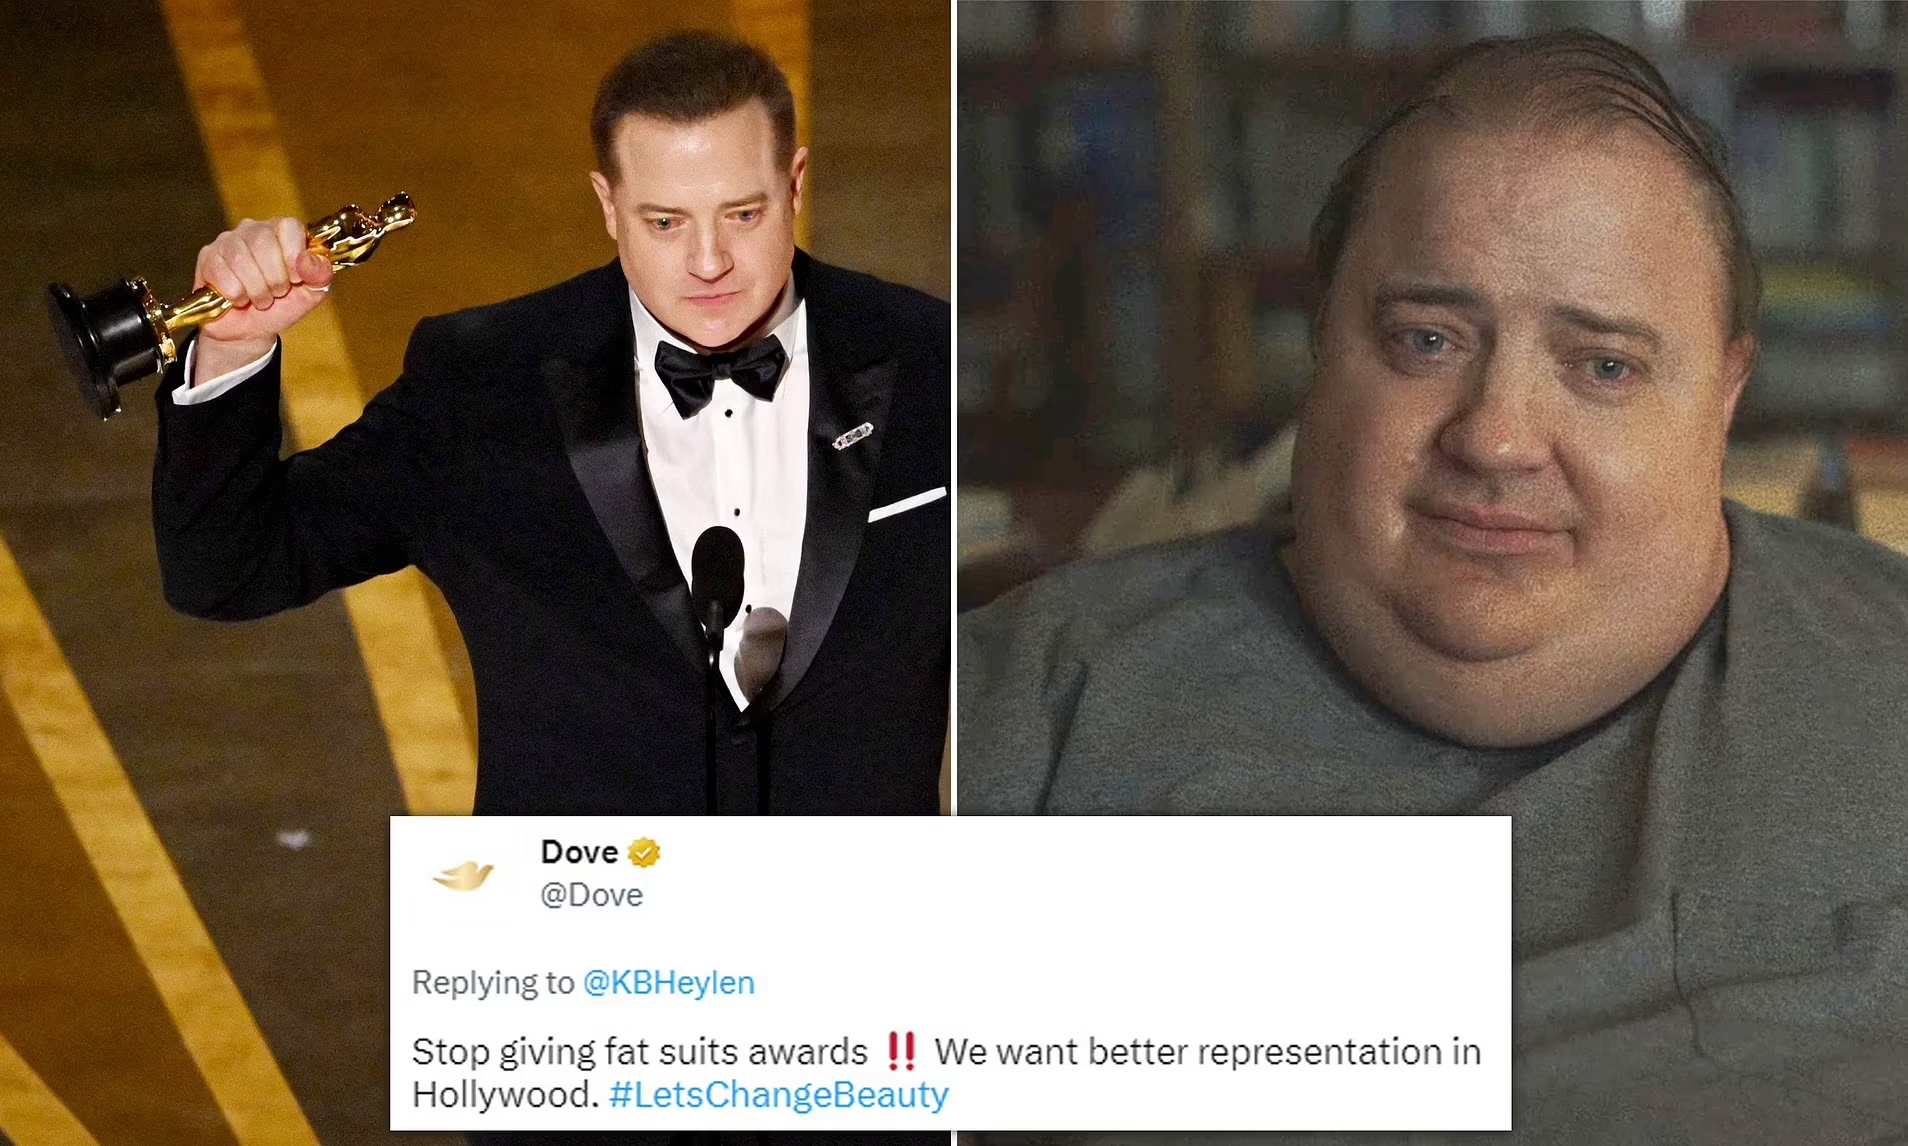 Brendan Fraser holding an Oscar beside his The Whale character and Dove's Tweet